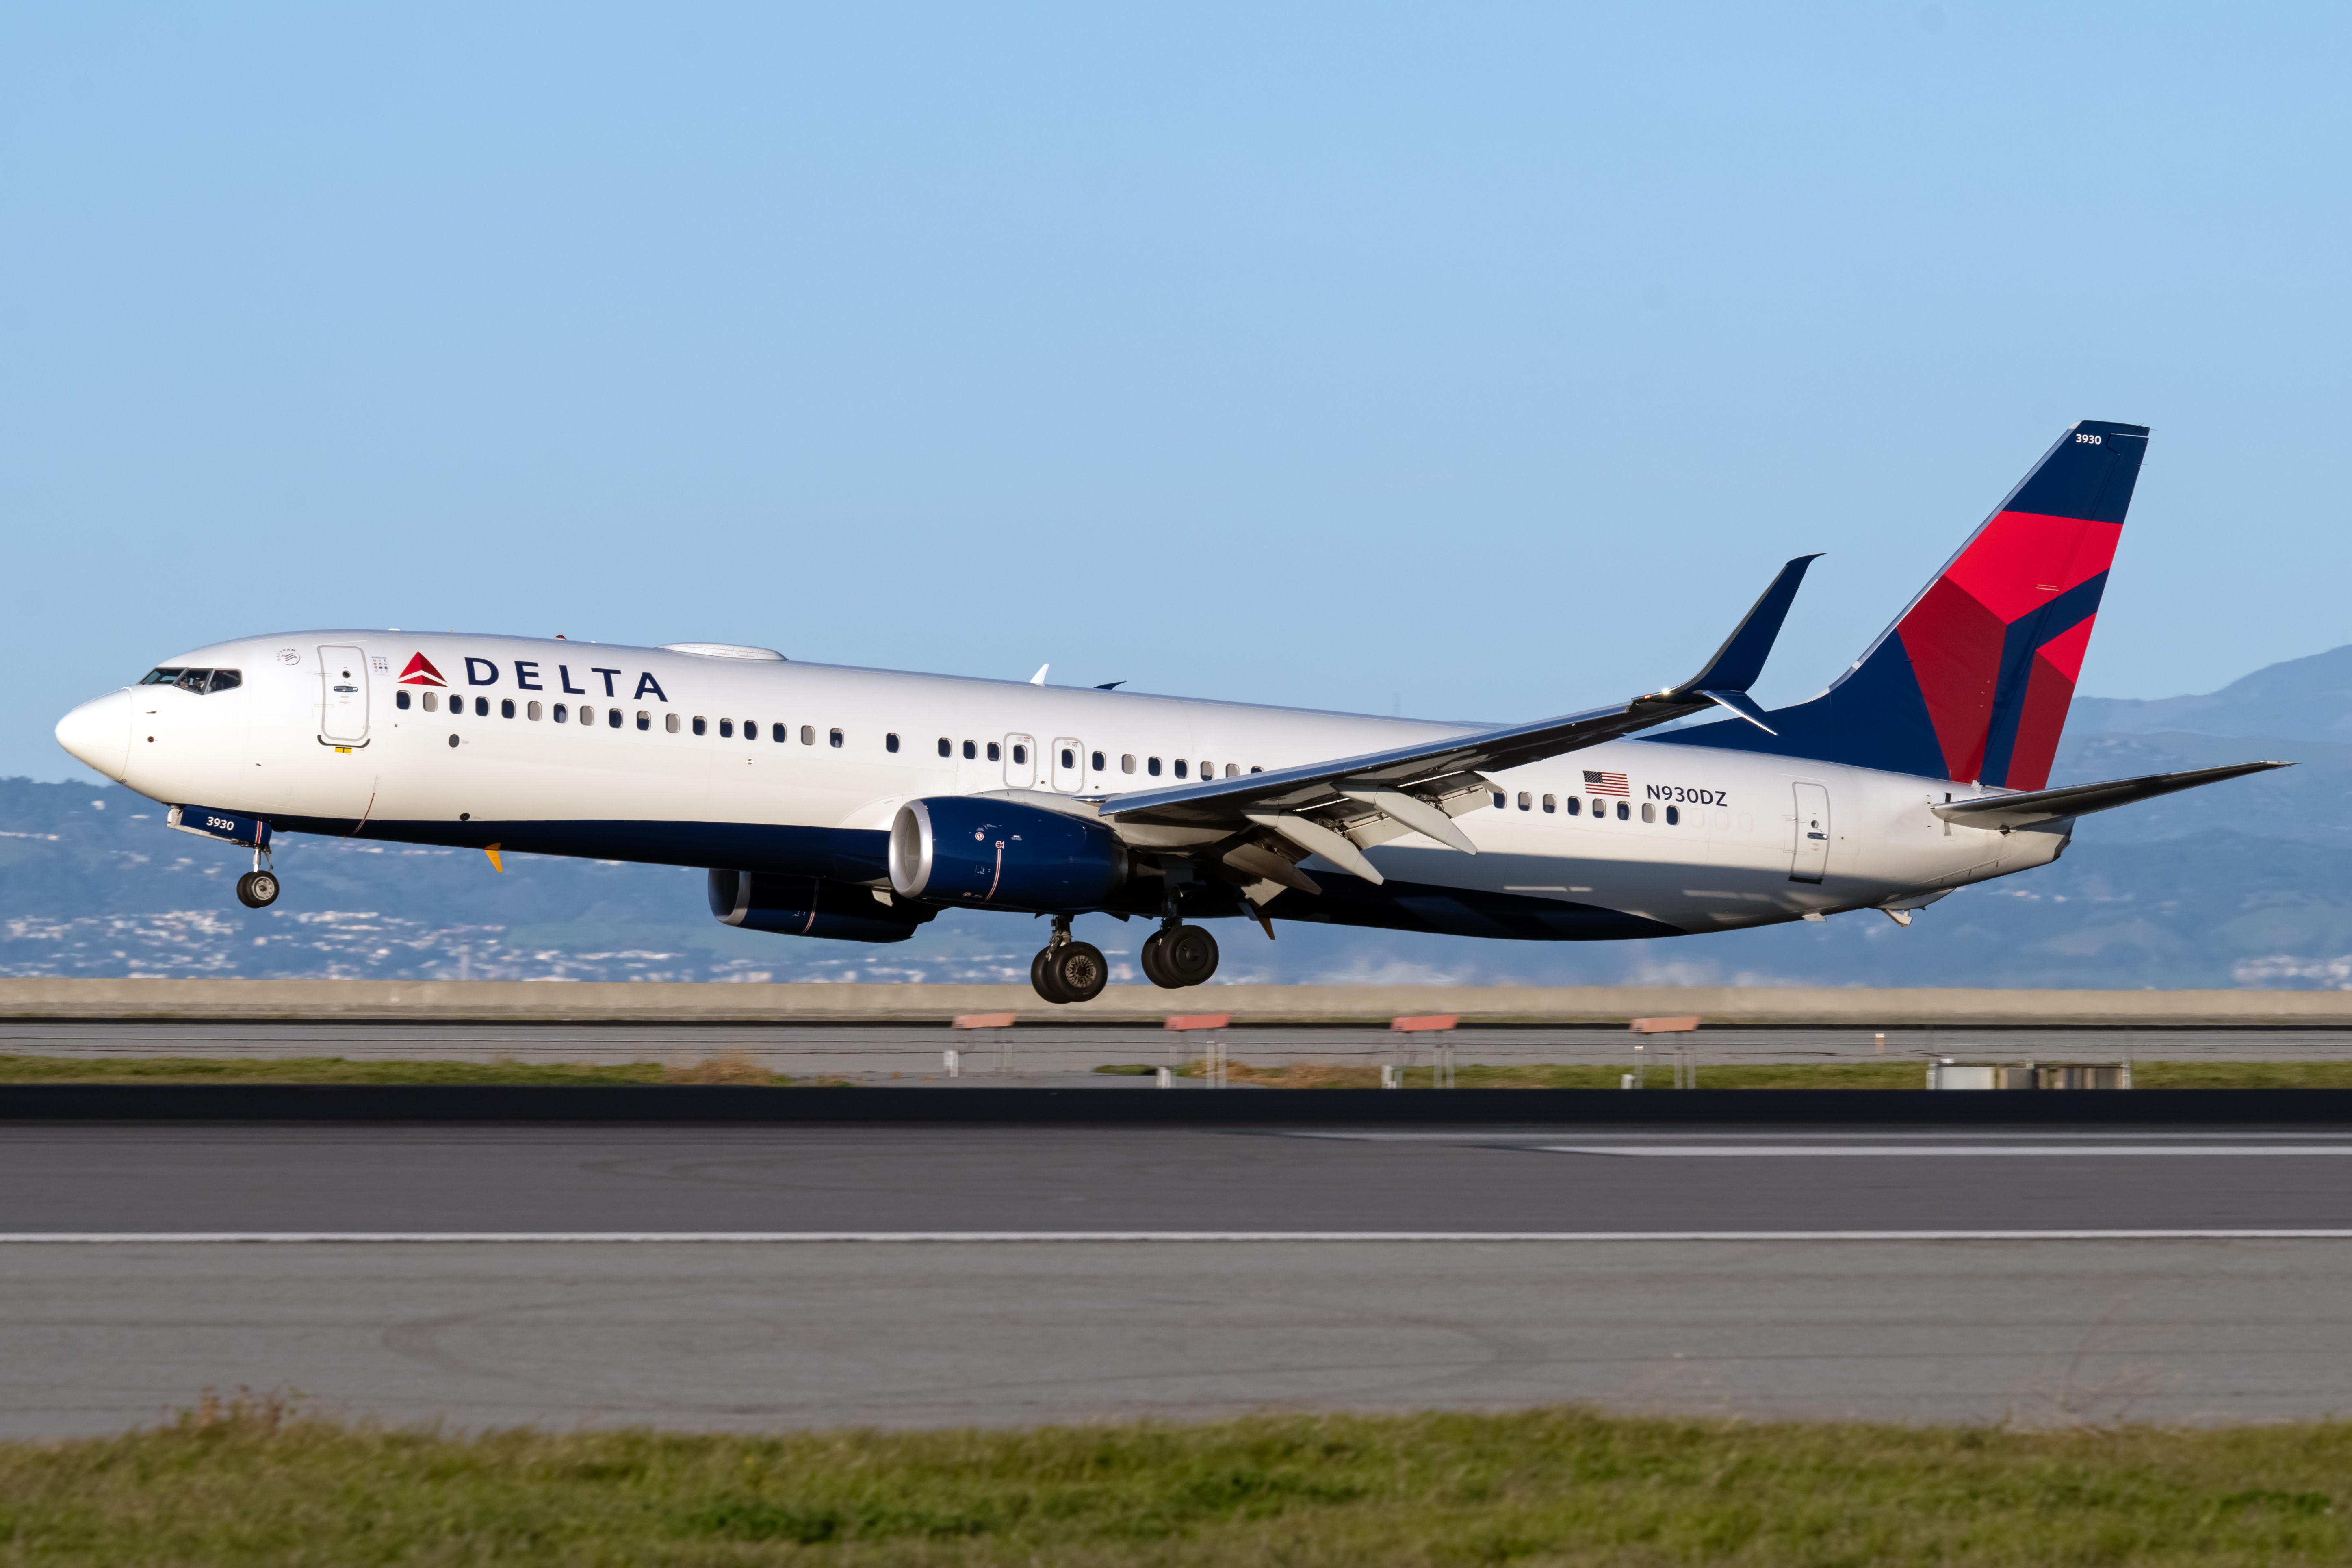 A Delta Air Lines Boeing 737-900 floating just above the runway.